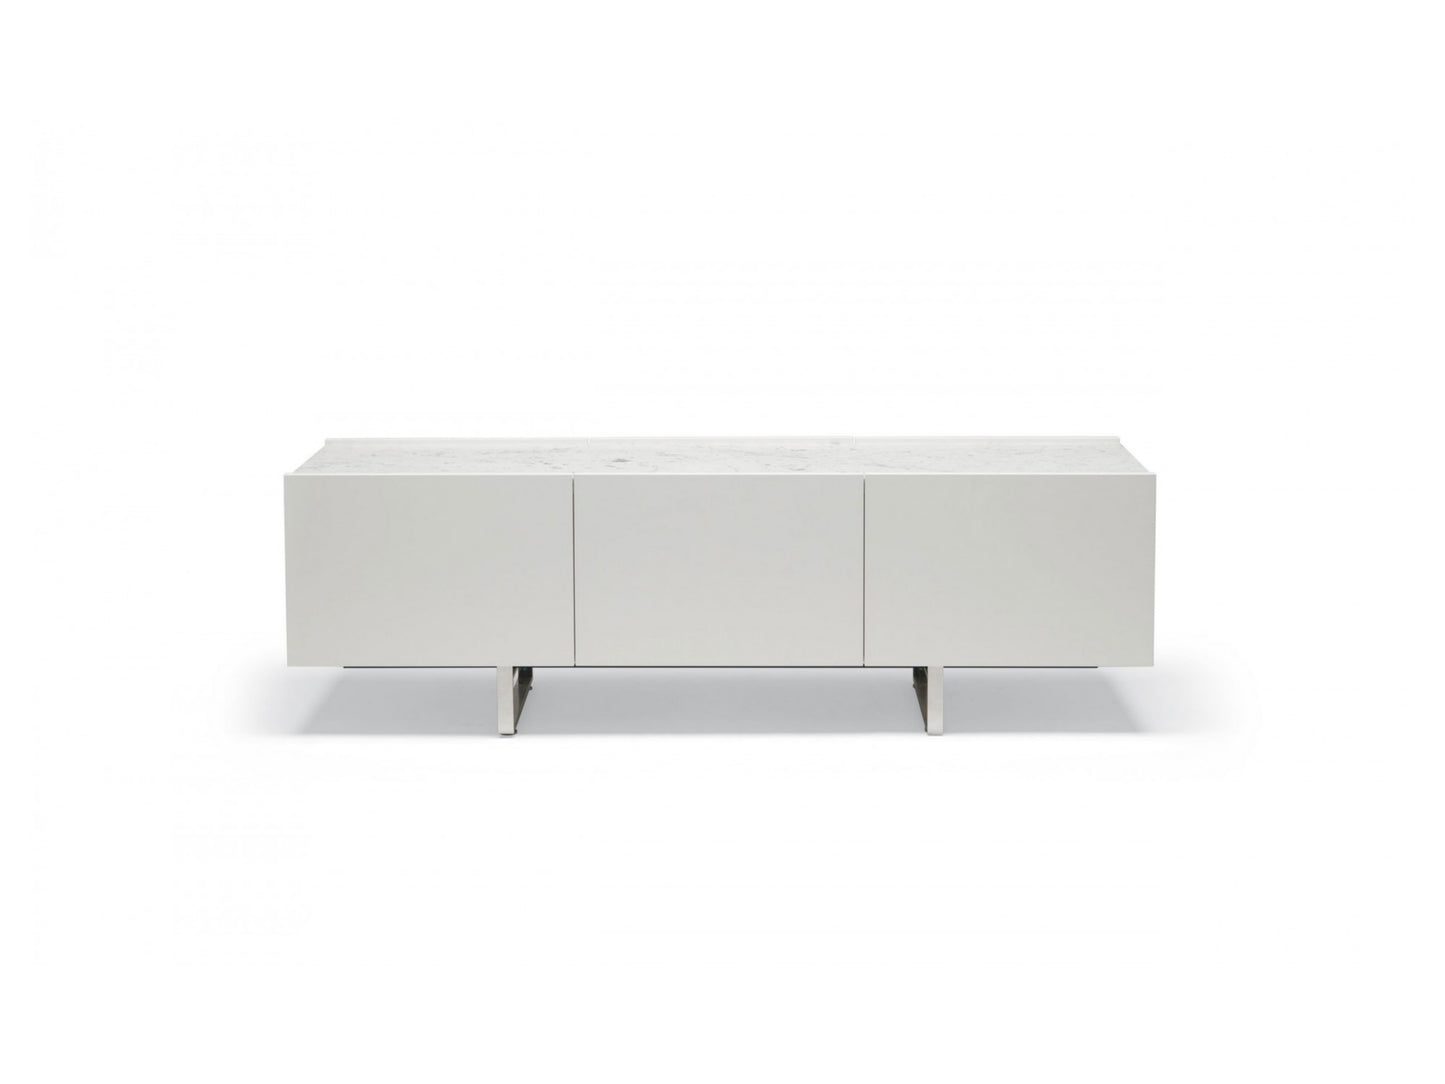 SQUARE | Sideboard with drawers and doors by MisuraEmme